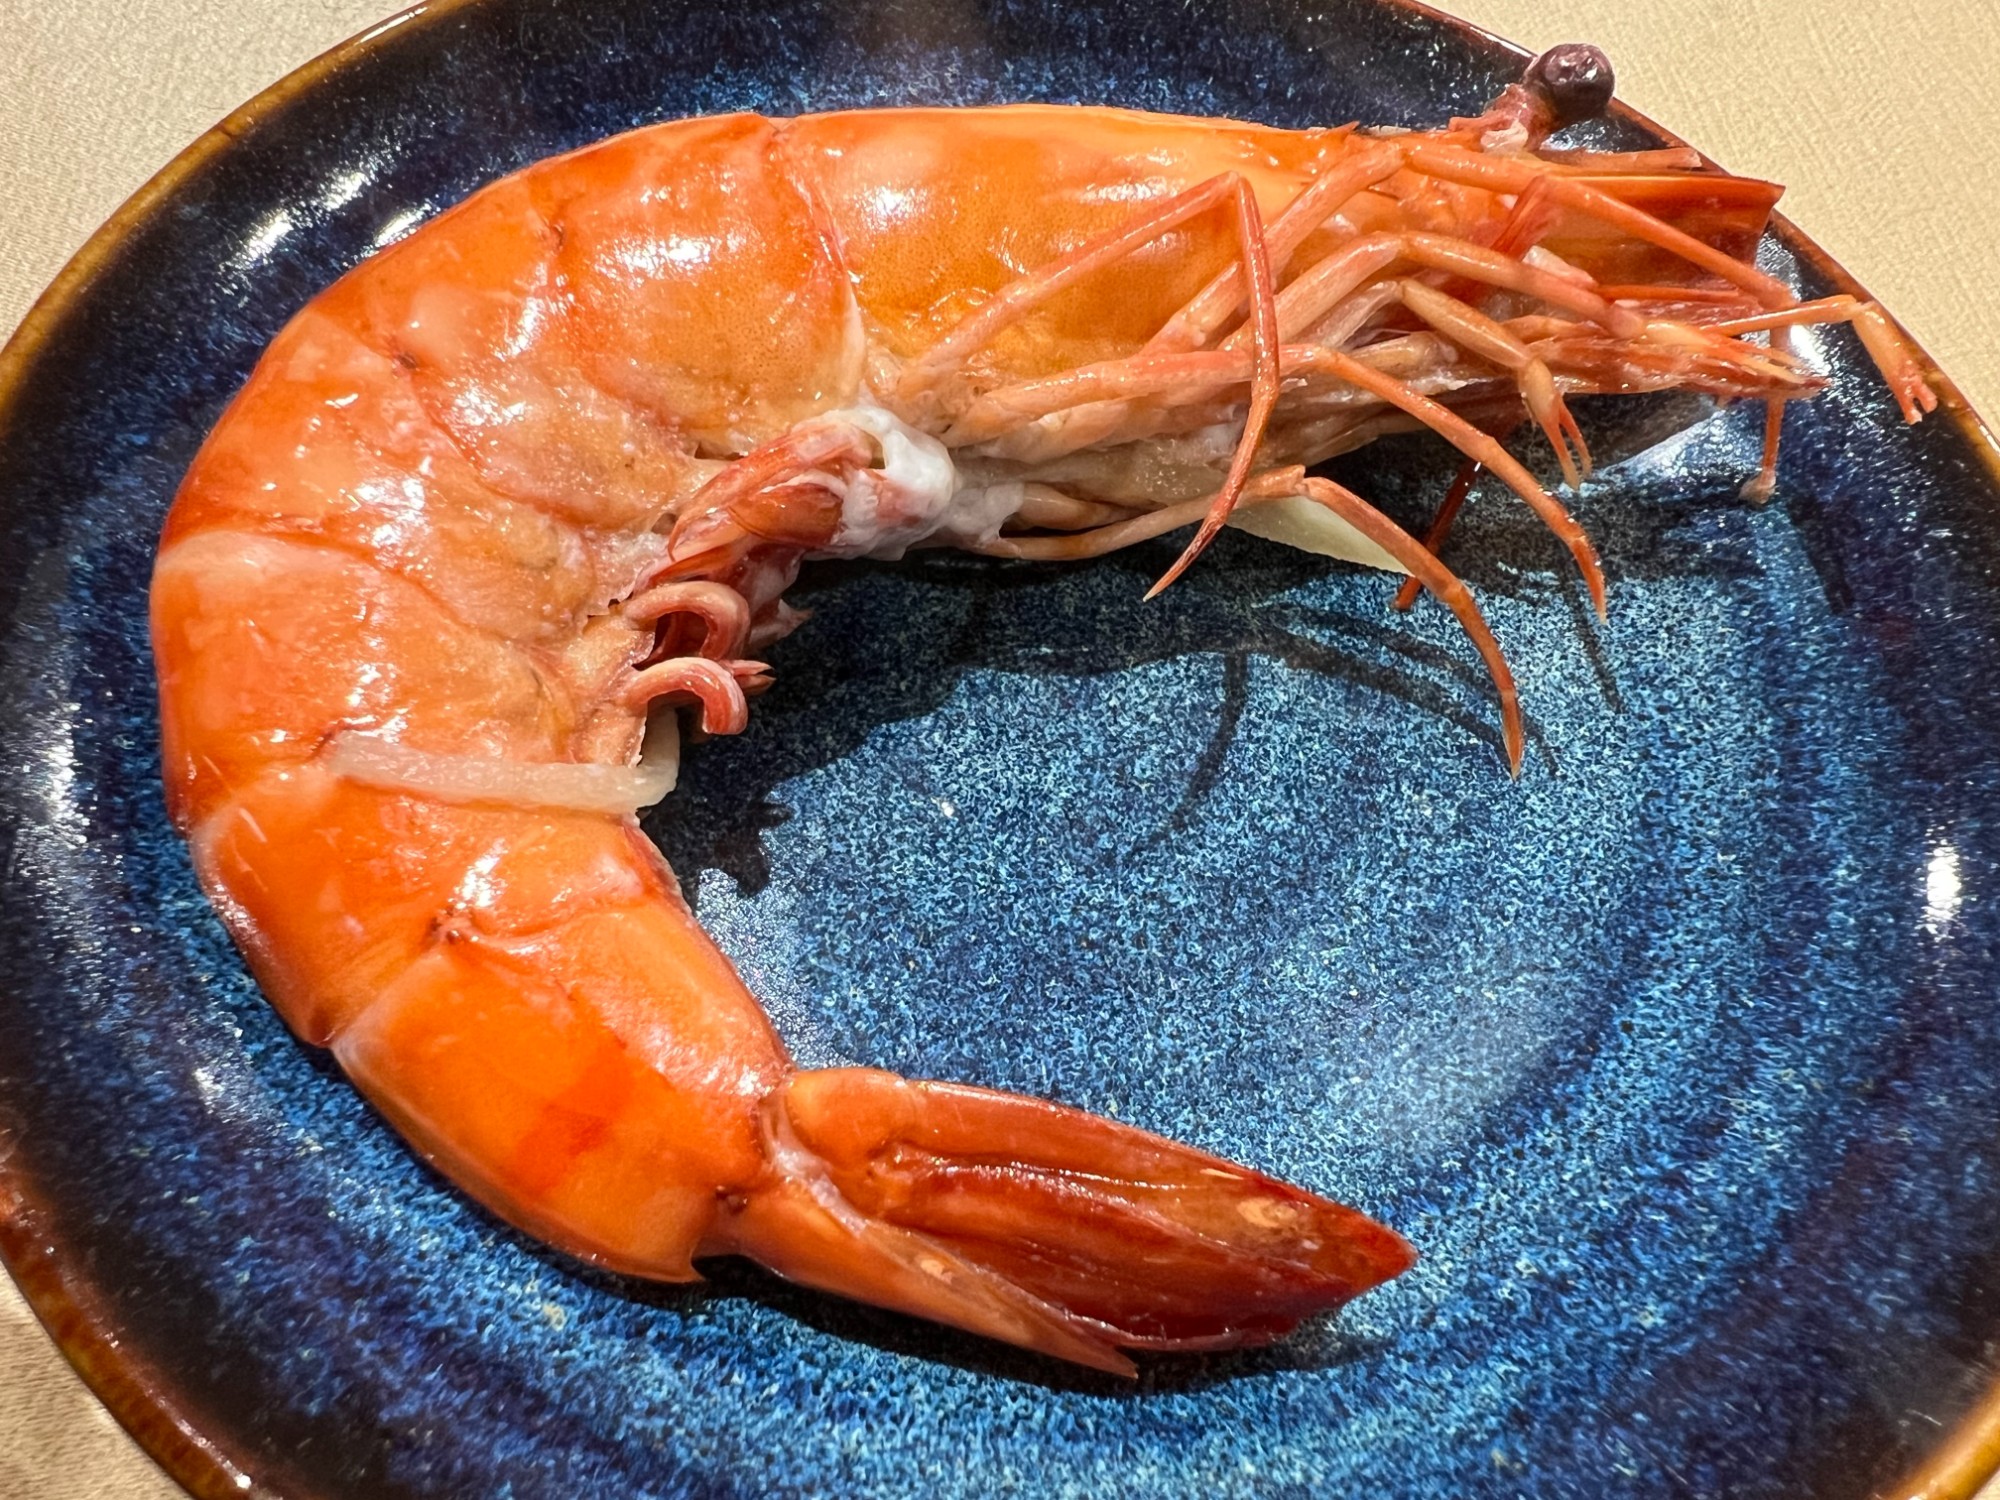 Raw shrimp prices fall: Another challenge the shrimp industry must overcome